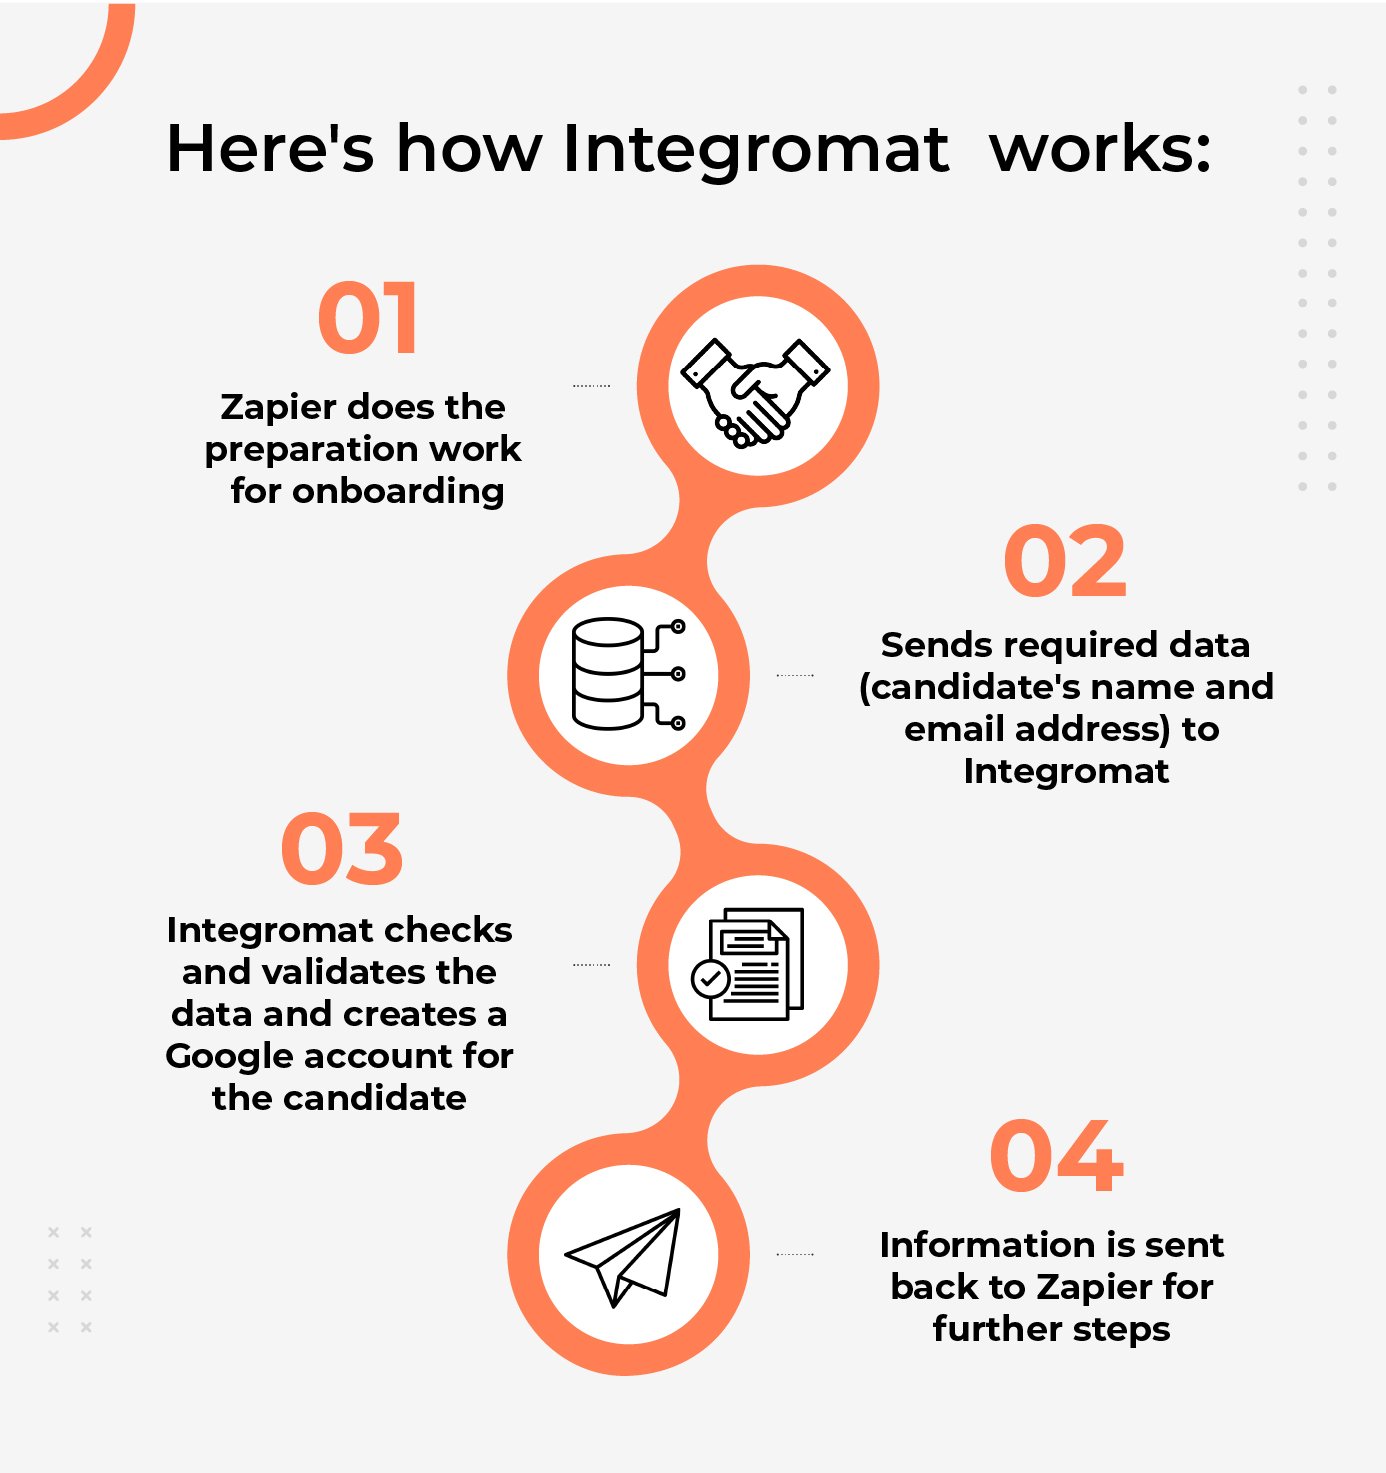 Axelerant uses Integromat to automate candidate journey